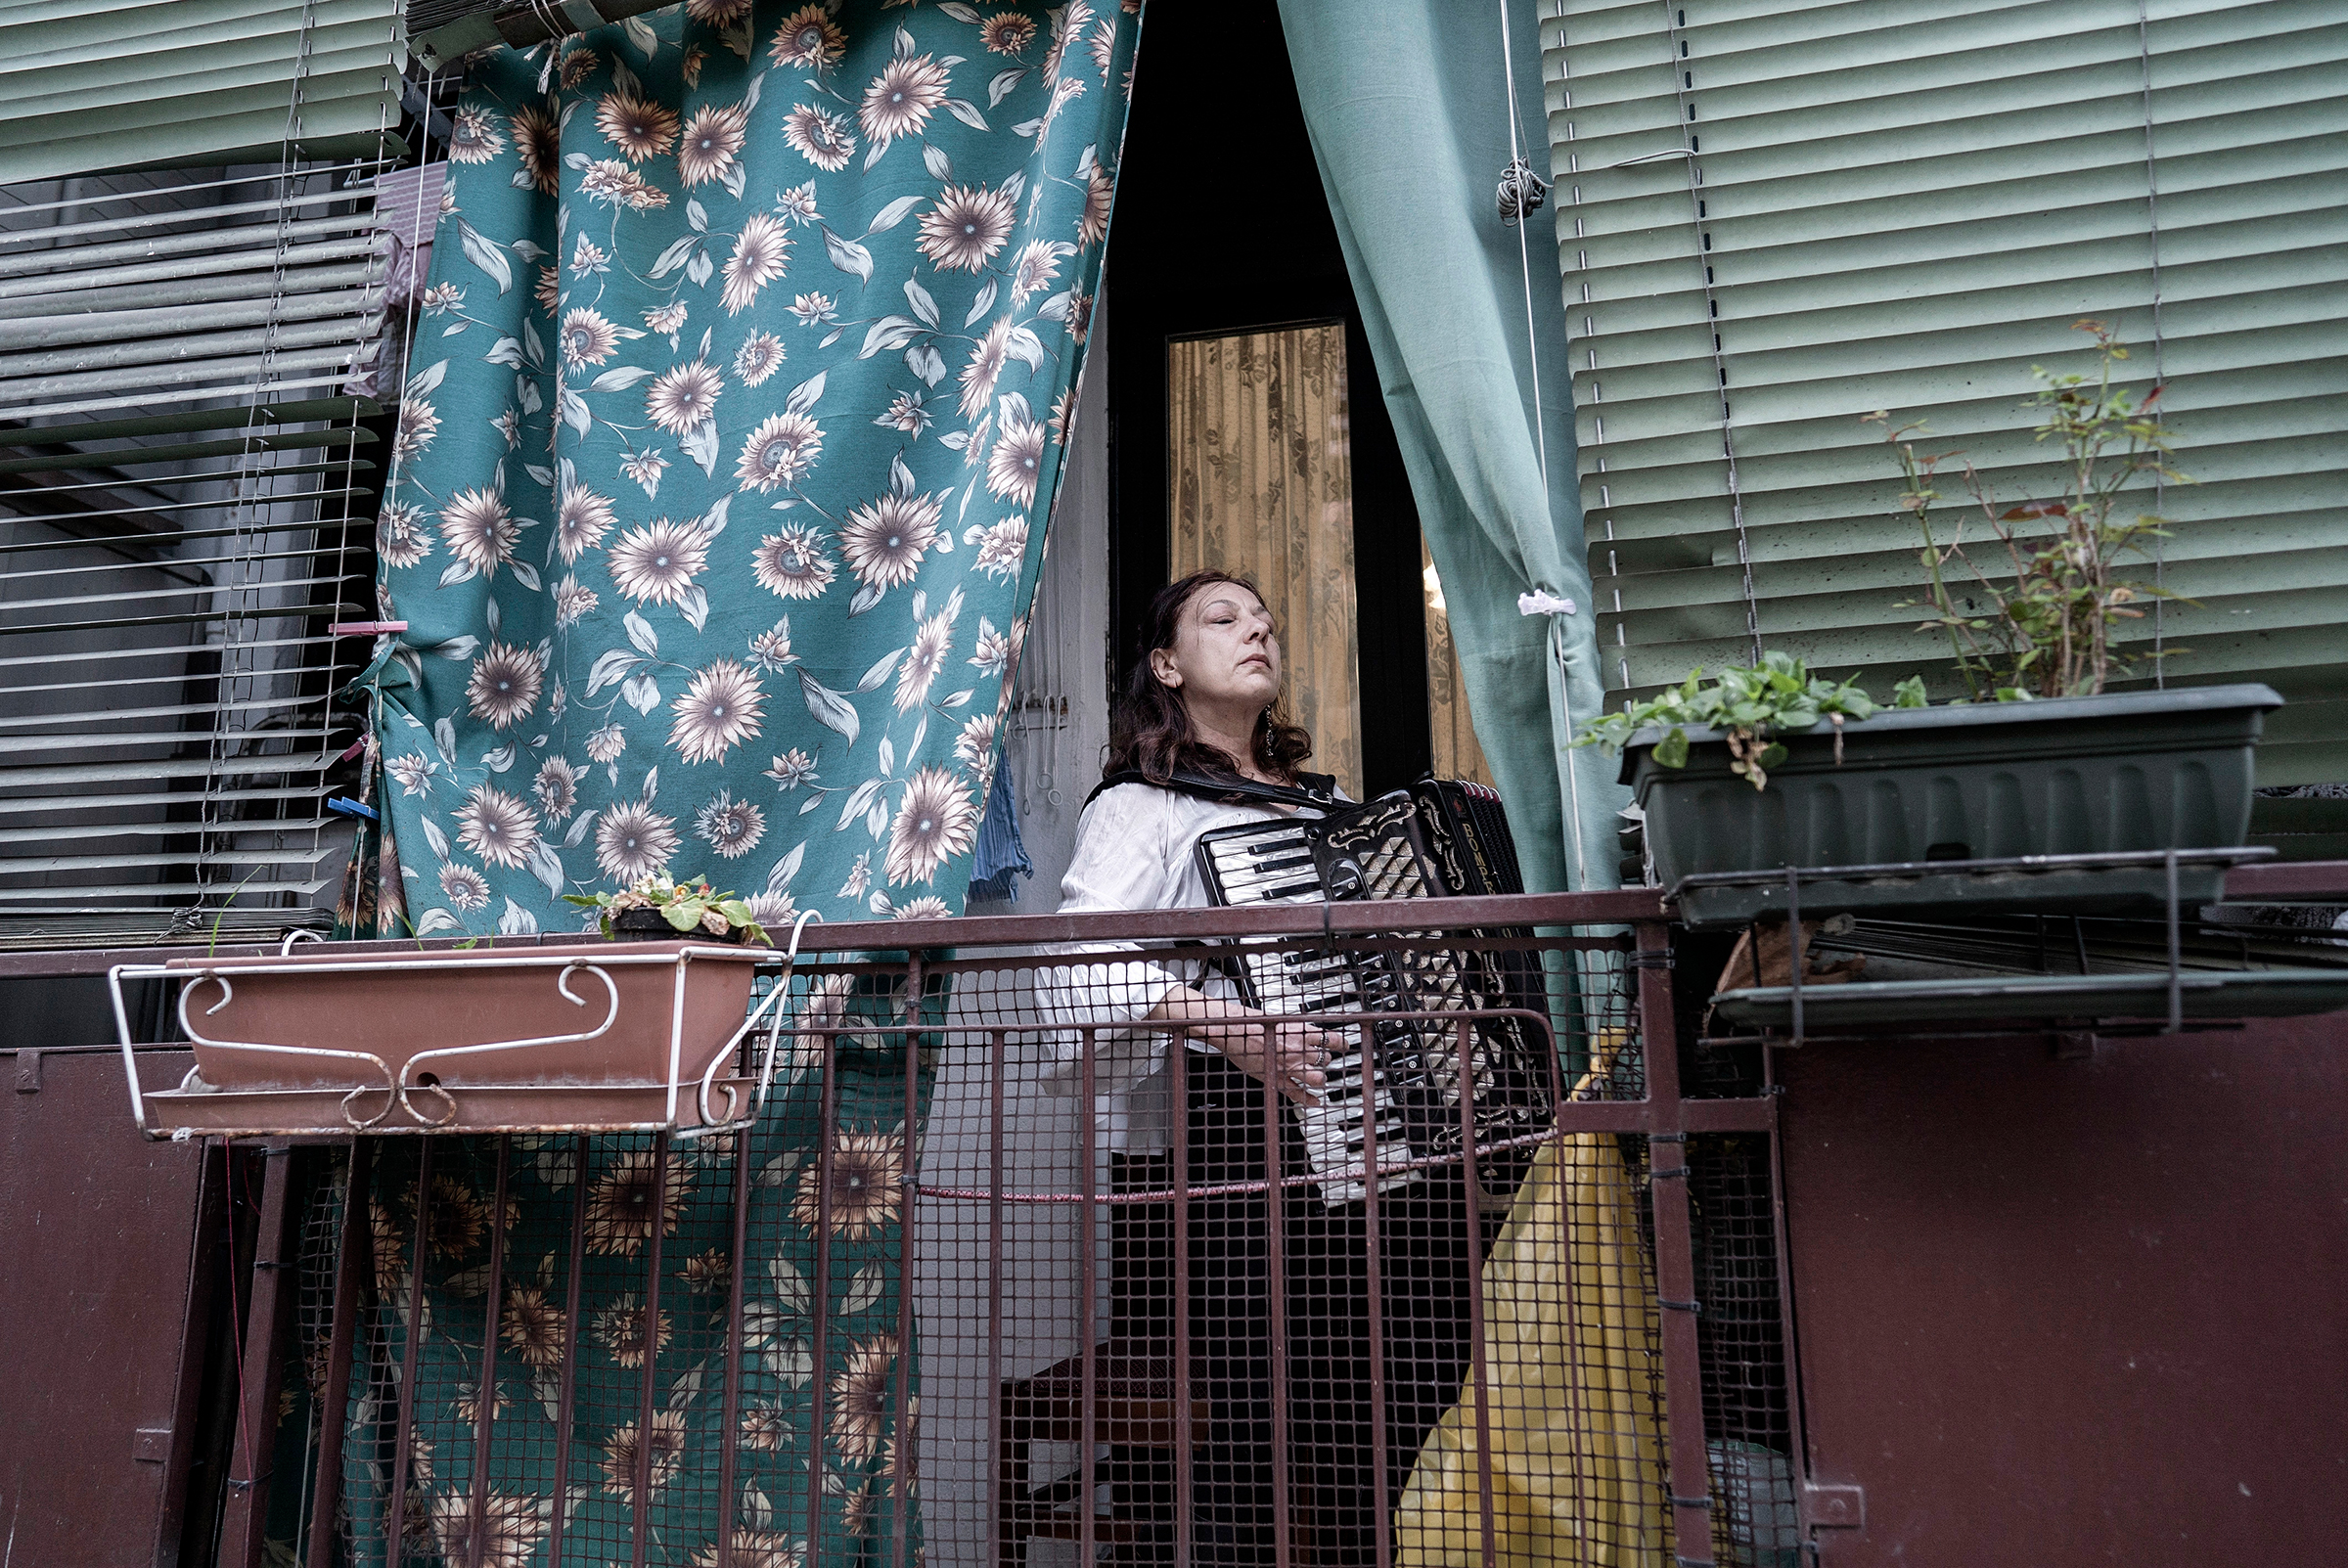 A woman plays music from her balcony in Milan on March 13. Italians remained essentially under house arrest as the nation—the European front in the global fight against coronavirus—had ordered extraordinary restrictions on their movement to prevent its spread. (Alessandro Grassani—The New York Times/Redux)